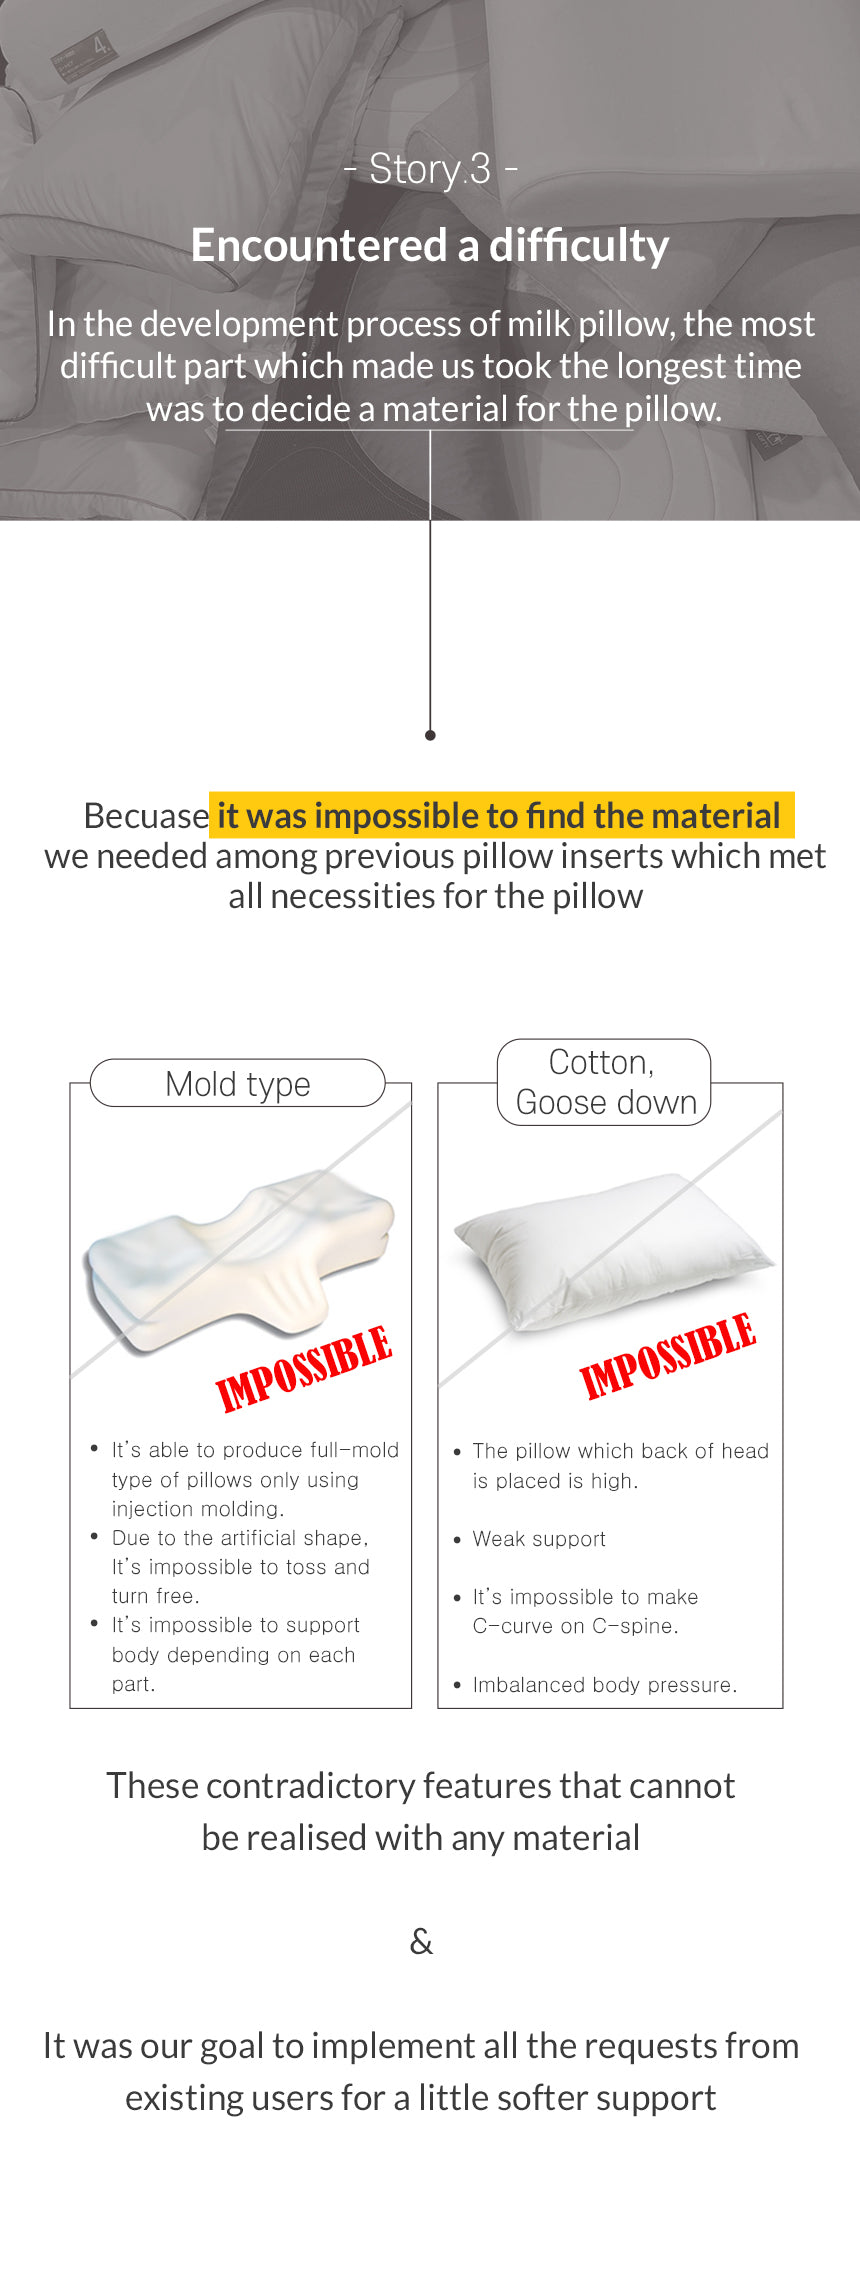 Comparison Mold type pillow and Cotton, Goose down Pillow with Milk Pillow premium latex fellets